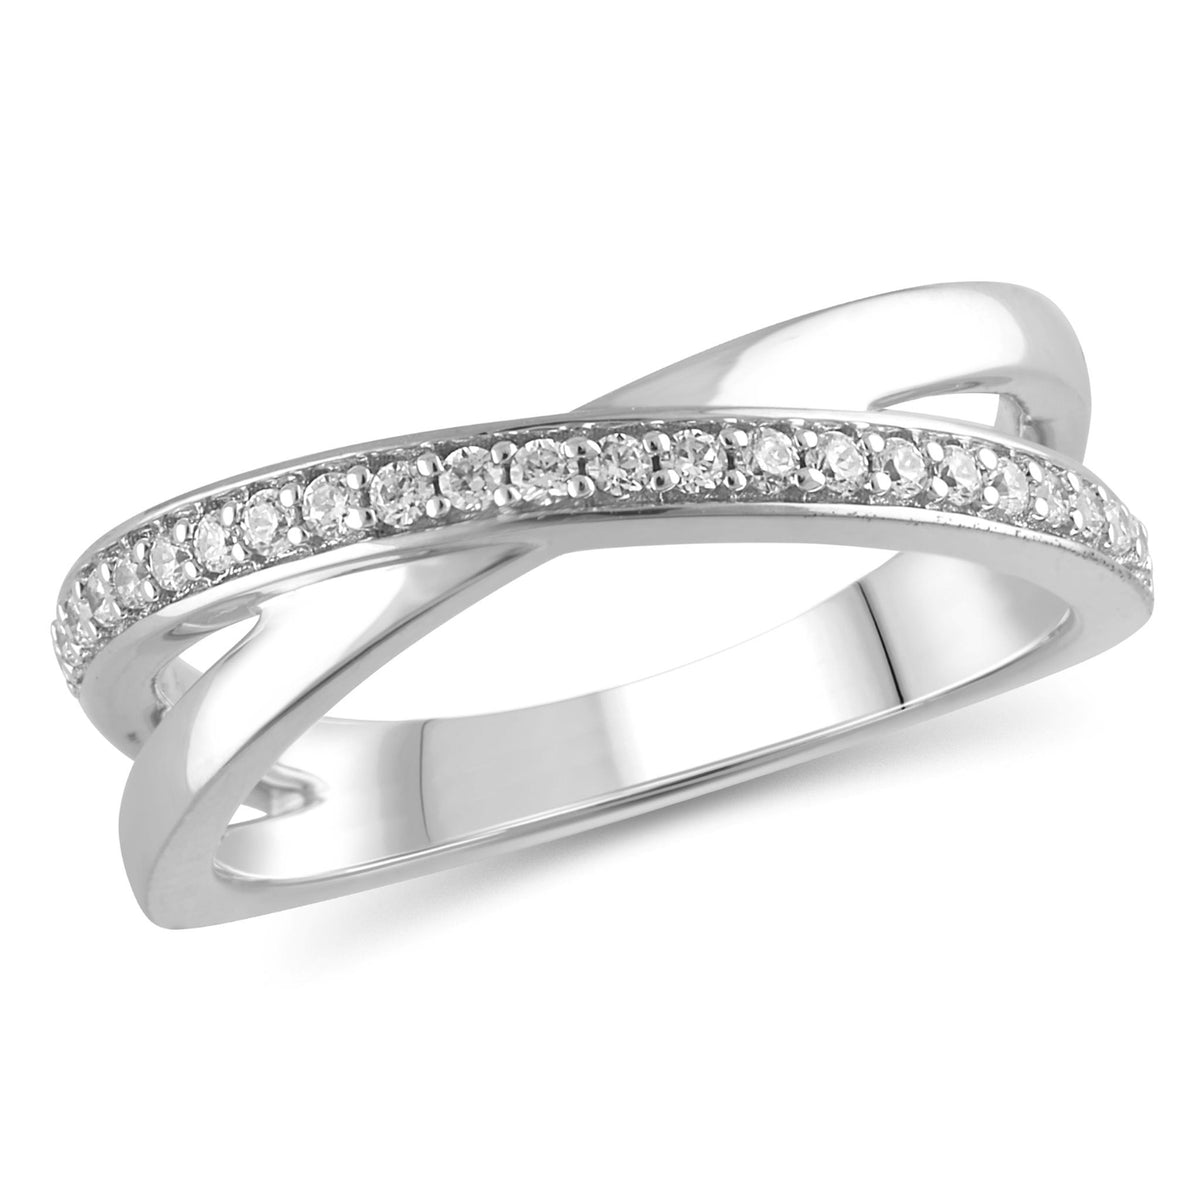 Fashion Ring With 0.20cttw Natural Diamonds